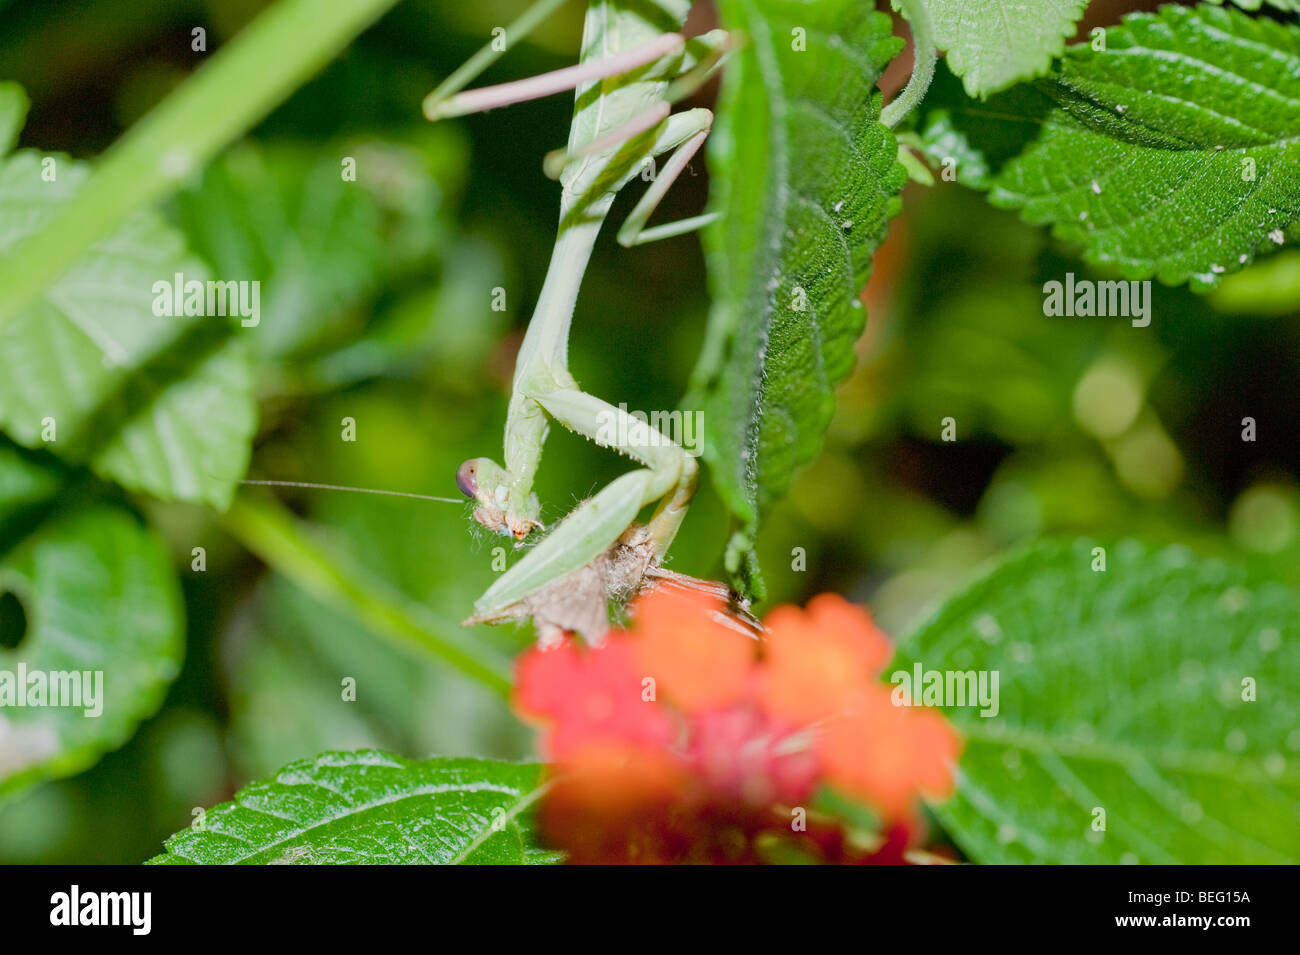 Large female Praying Mantis eating a butterfly Stock Photo